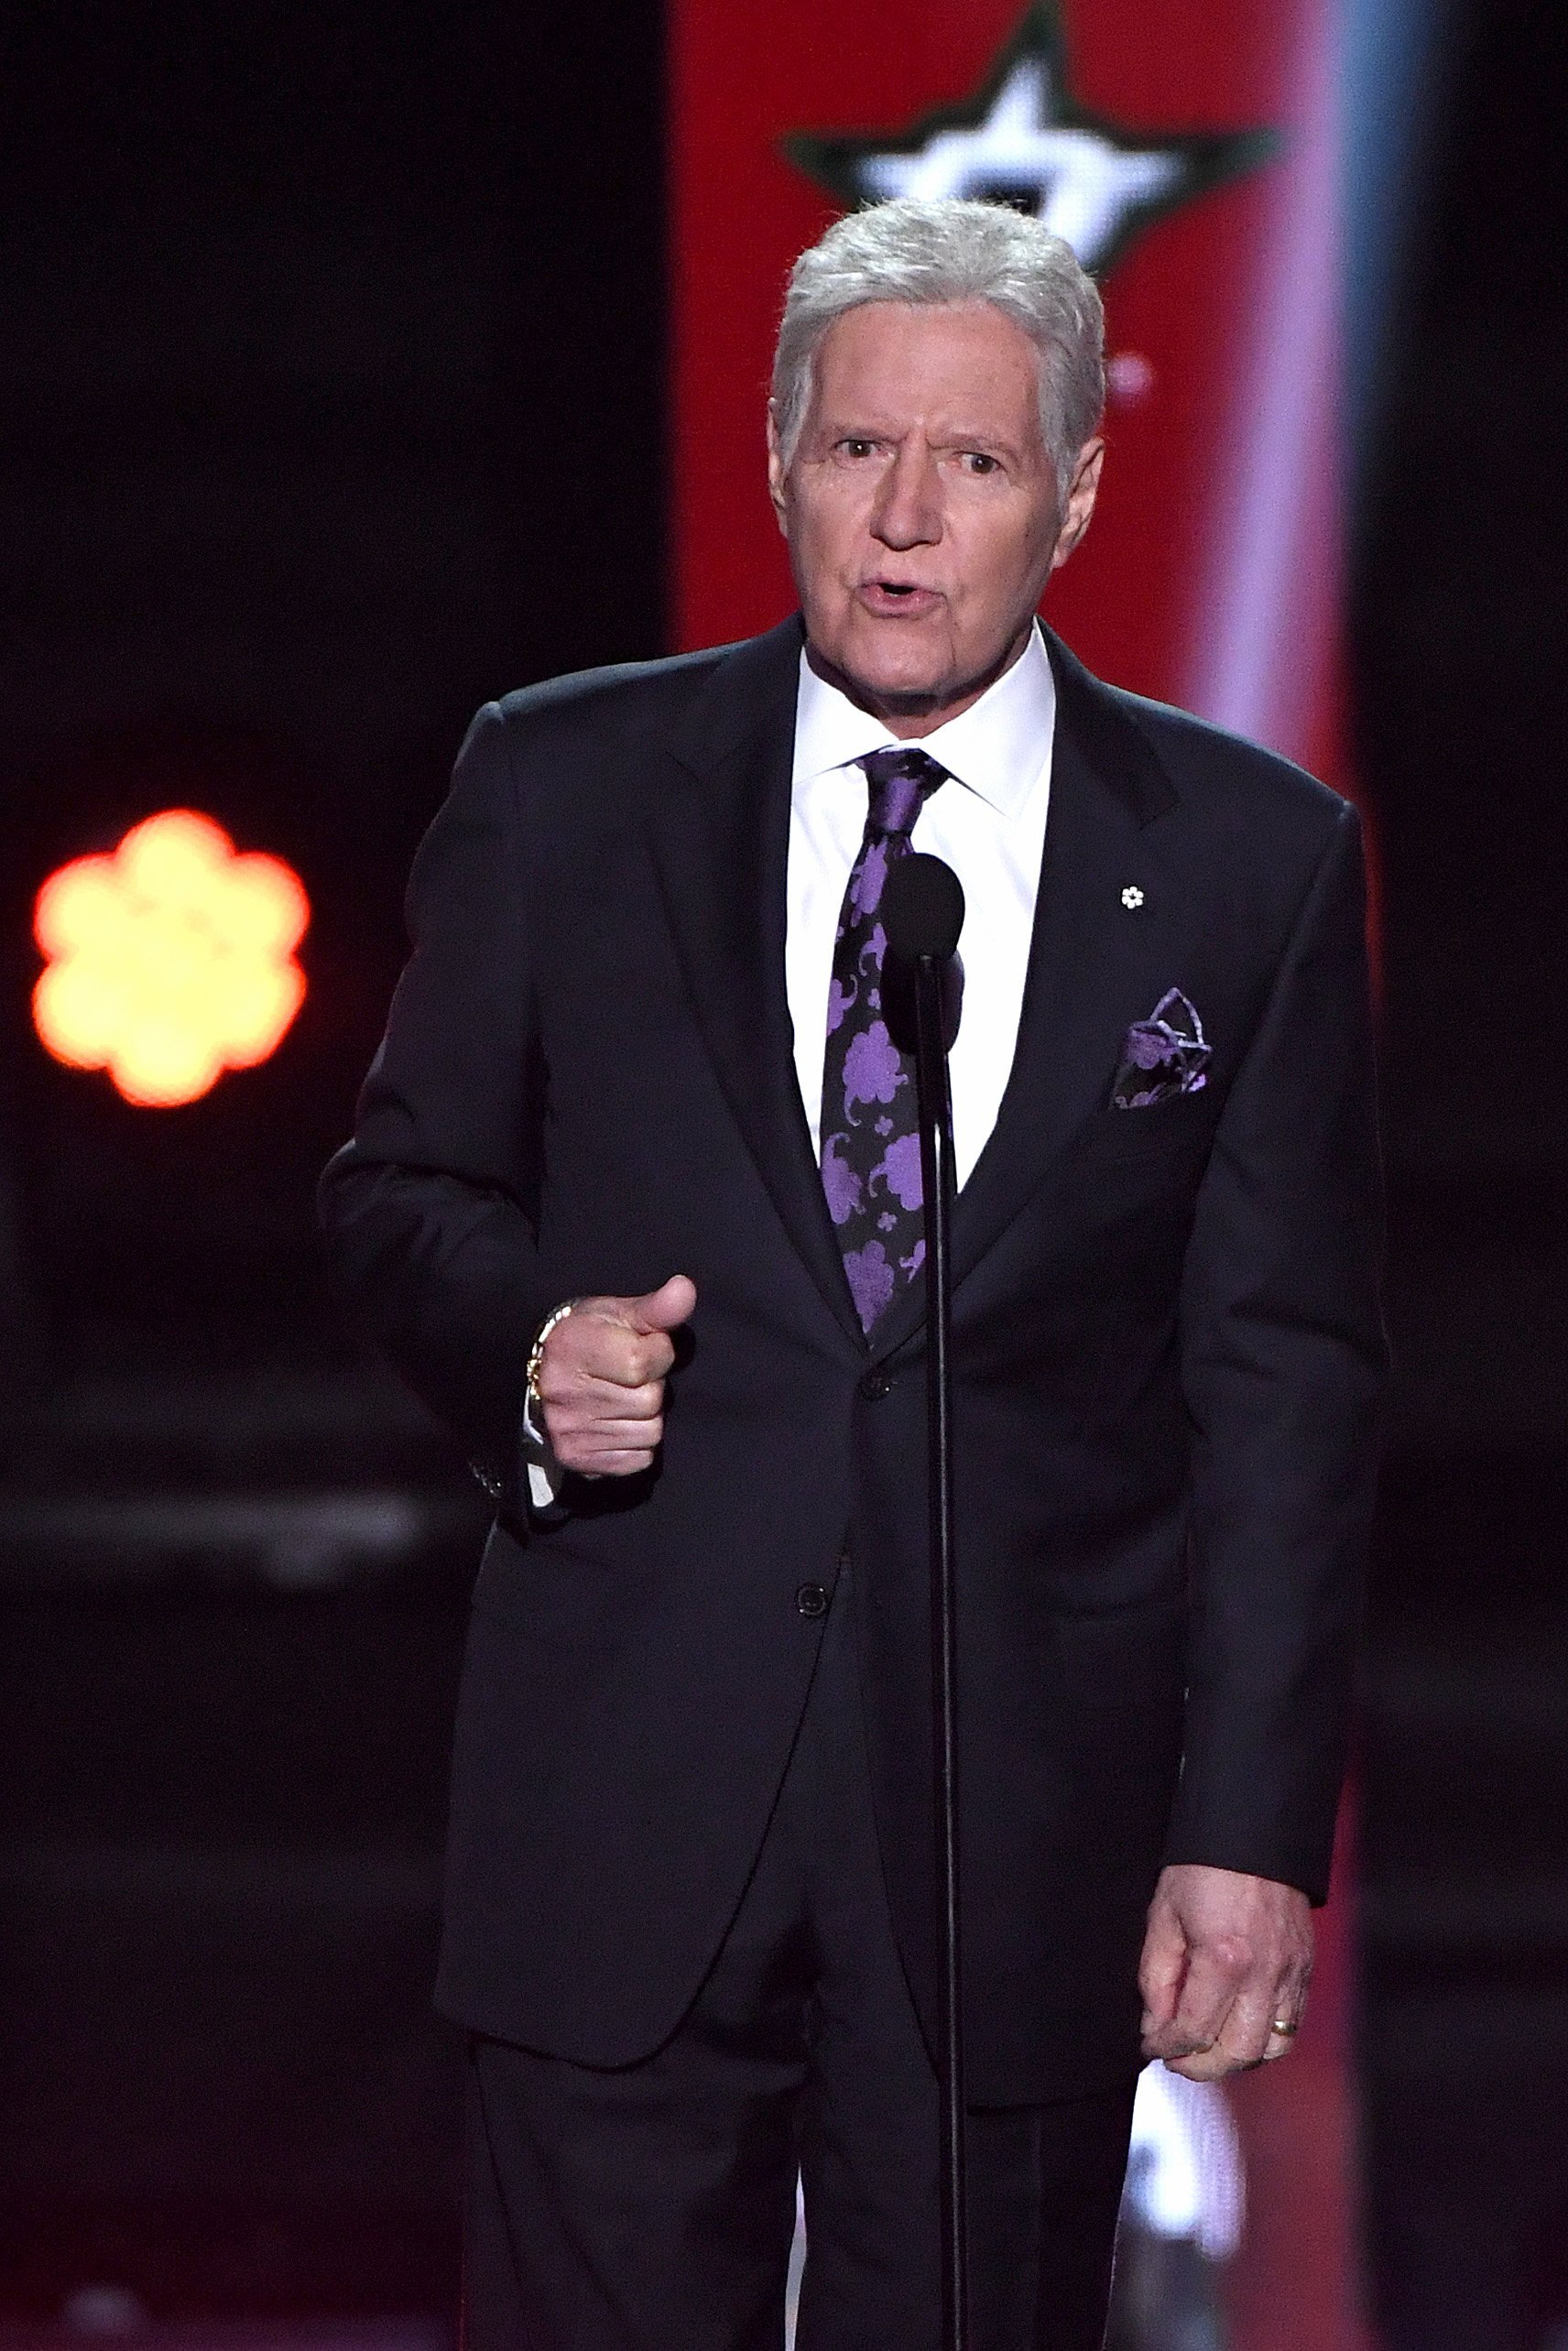 Alex Trebek presents the Hart Memorial Trophy during the 2019 NHL Awards on June 19, 2019, in Las Vegas, Nevada. | Source: Getty Images.